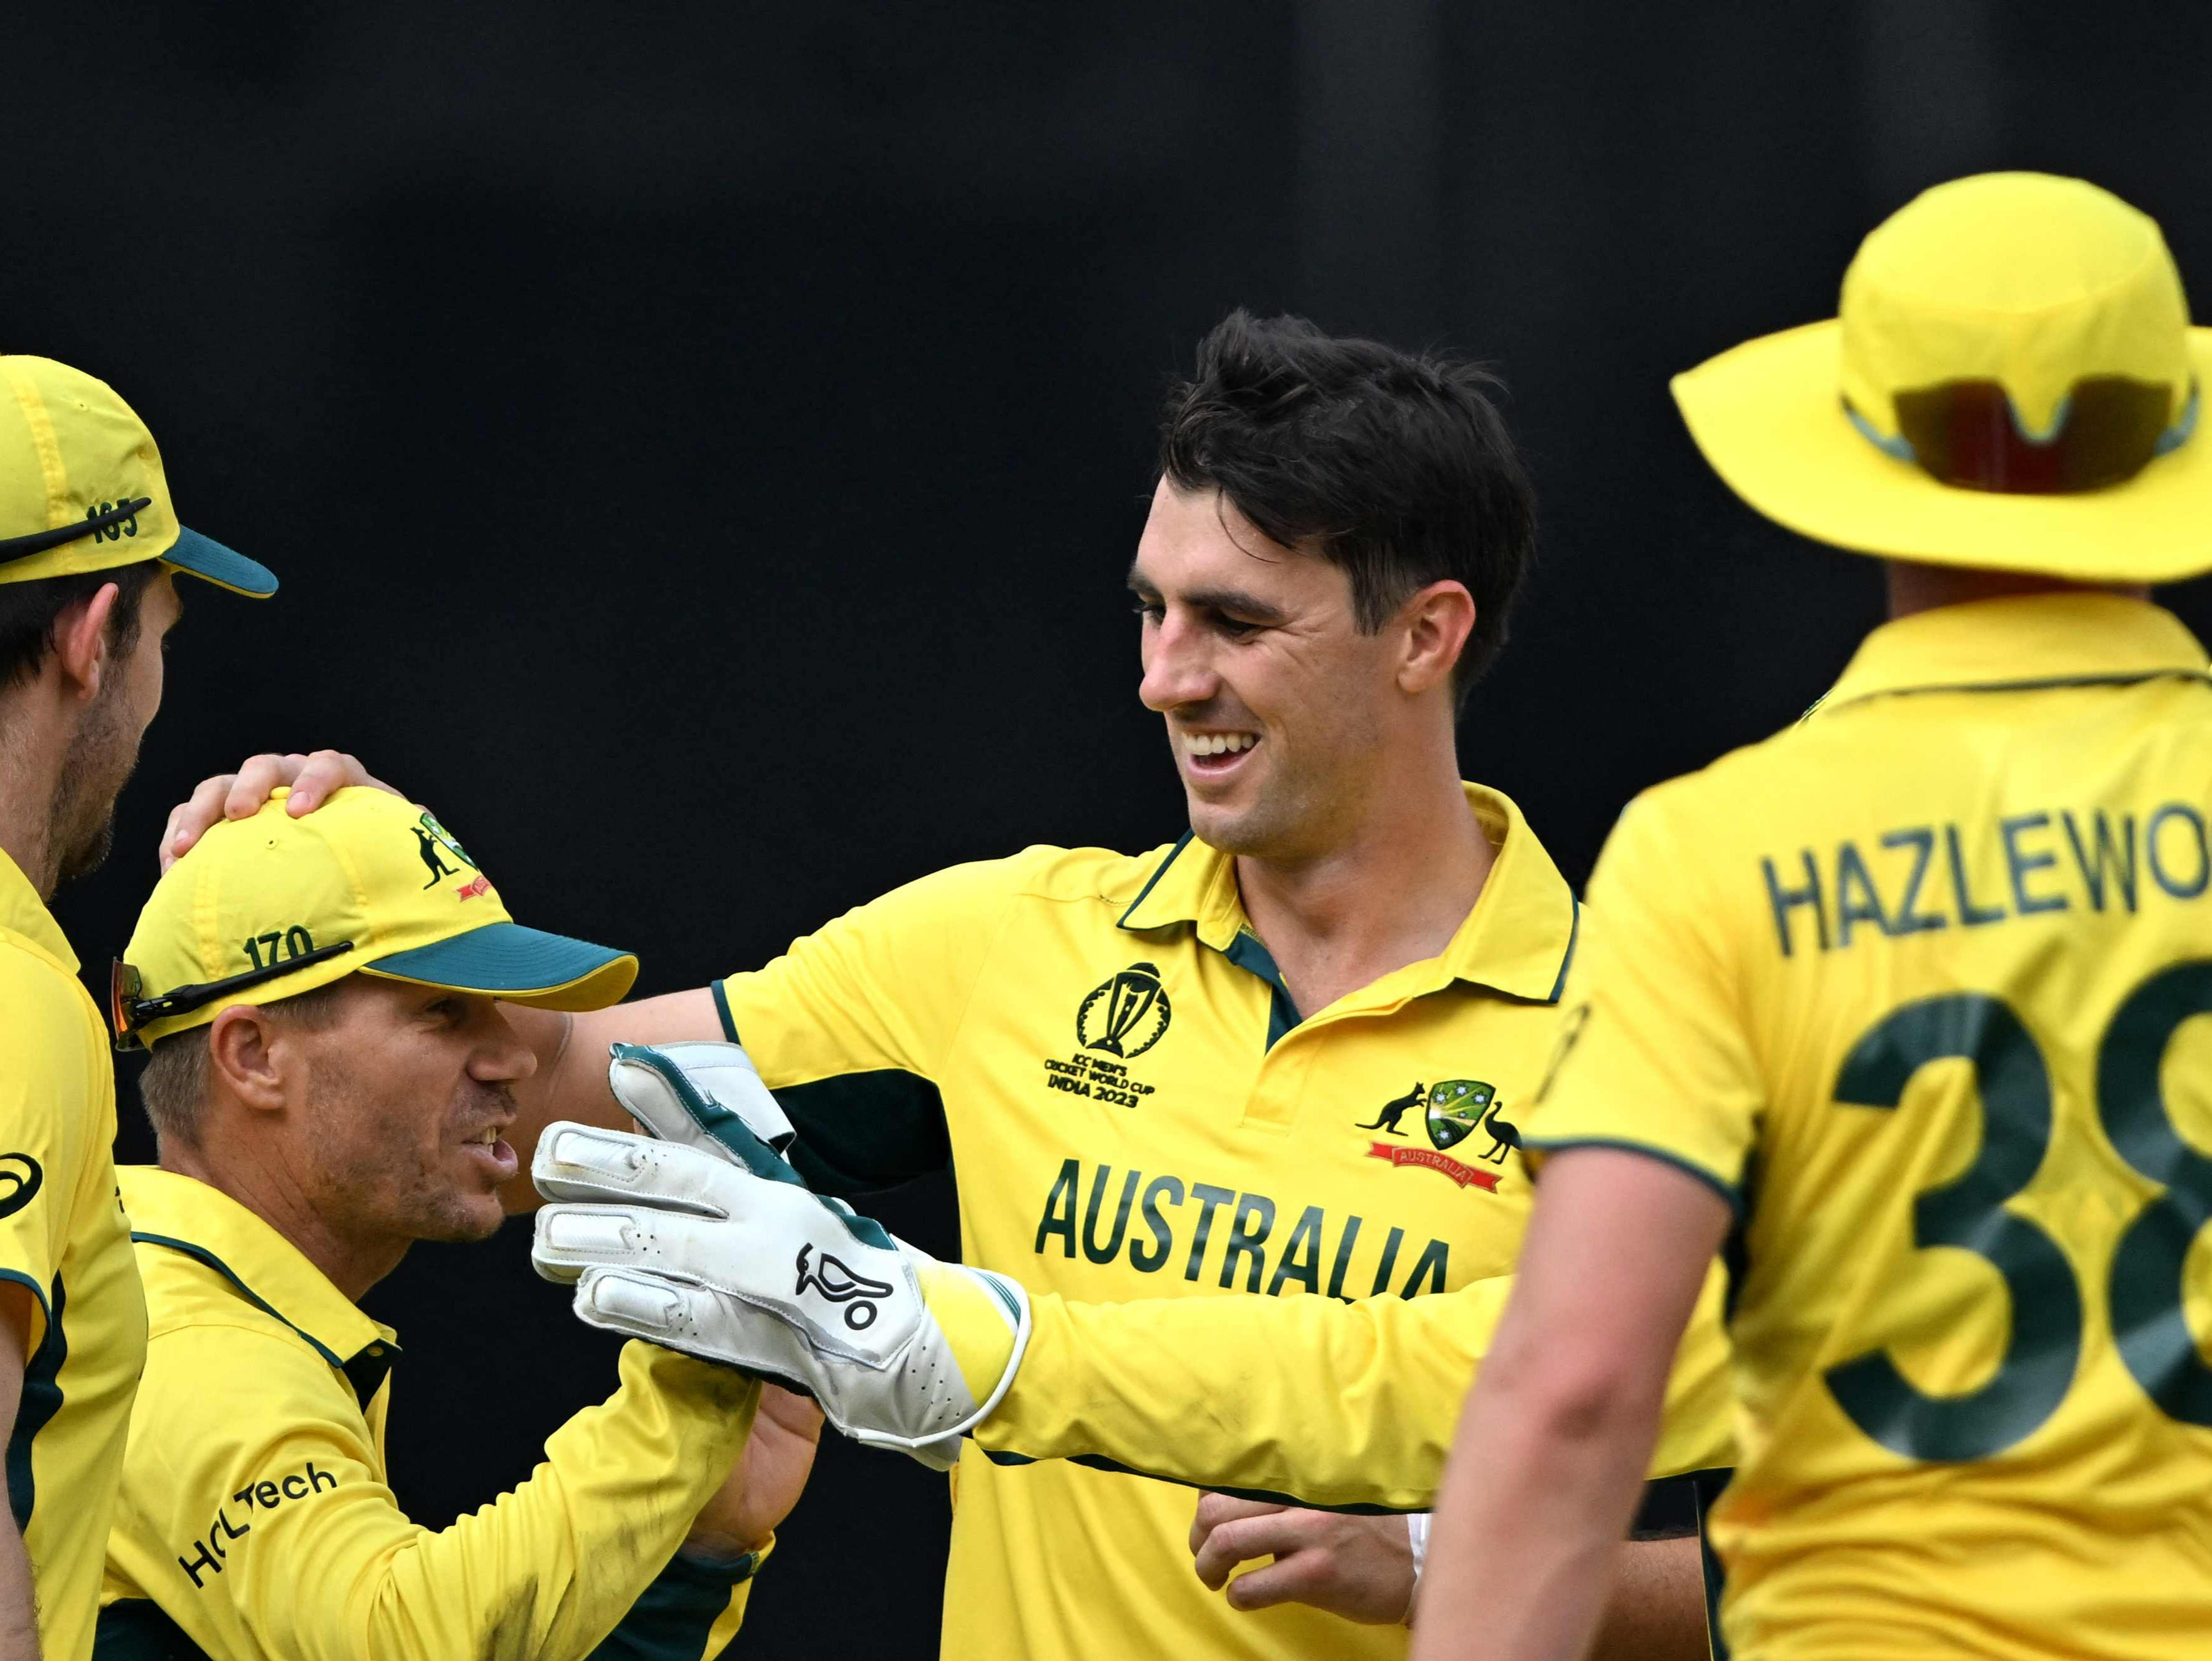 Australia captain Pat Cummins believes his team’s experience of big games will be beneficial